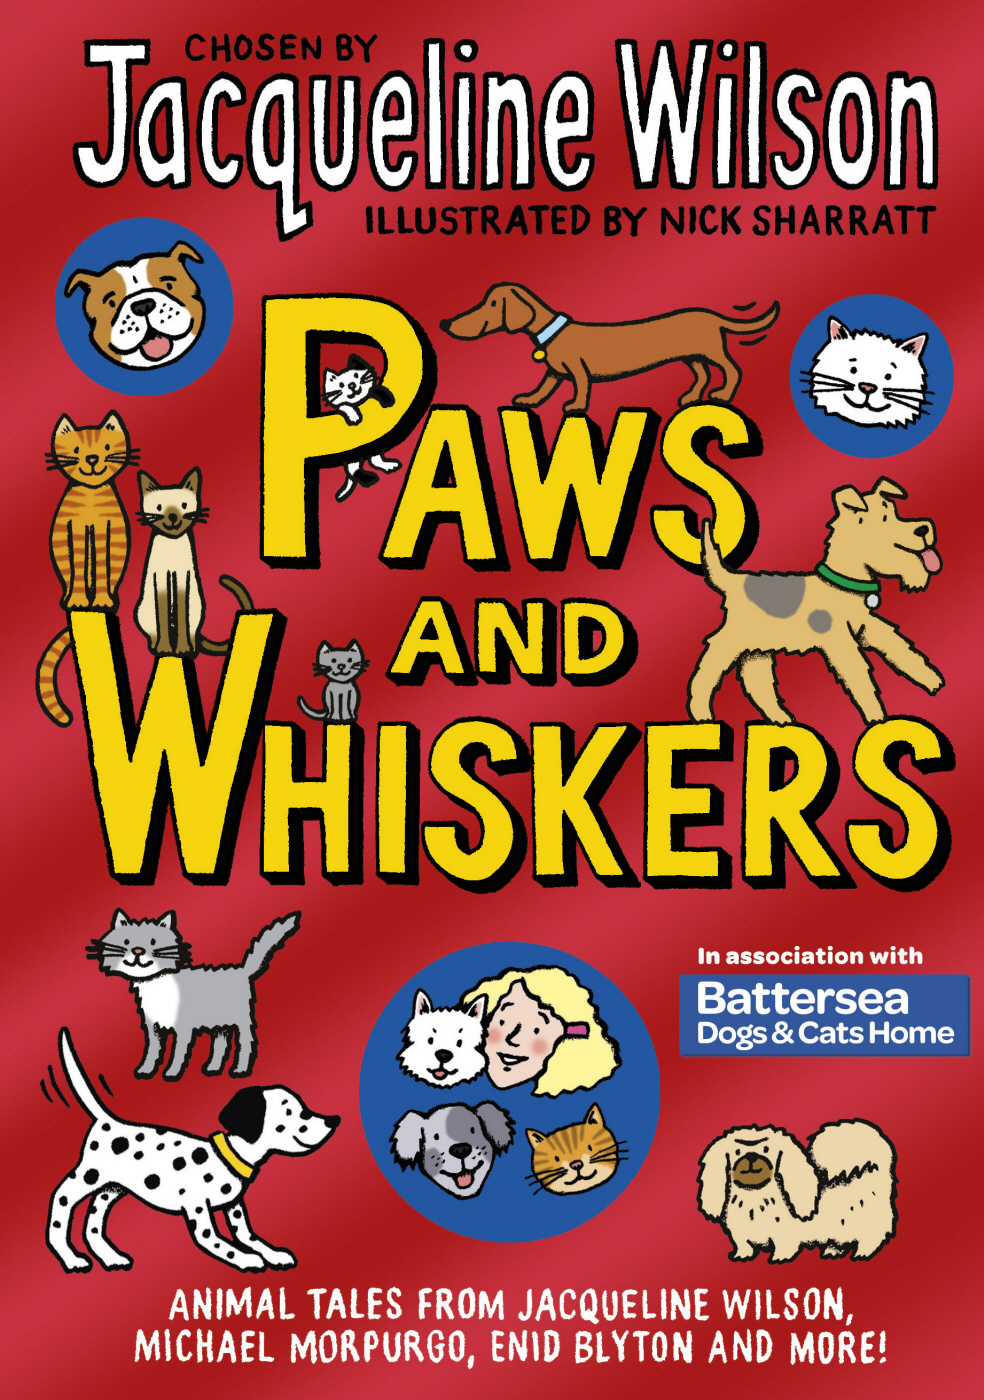 Paws and Whiskers by Jacqueline Wilson